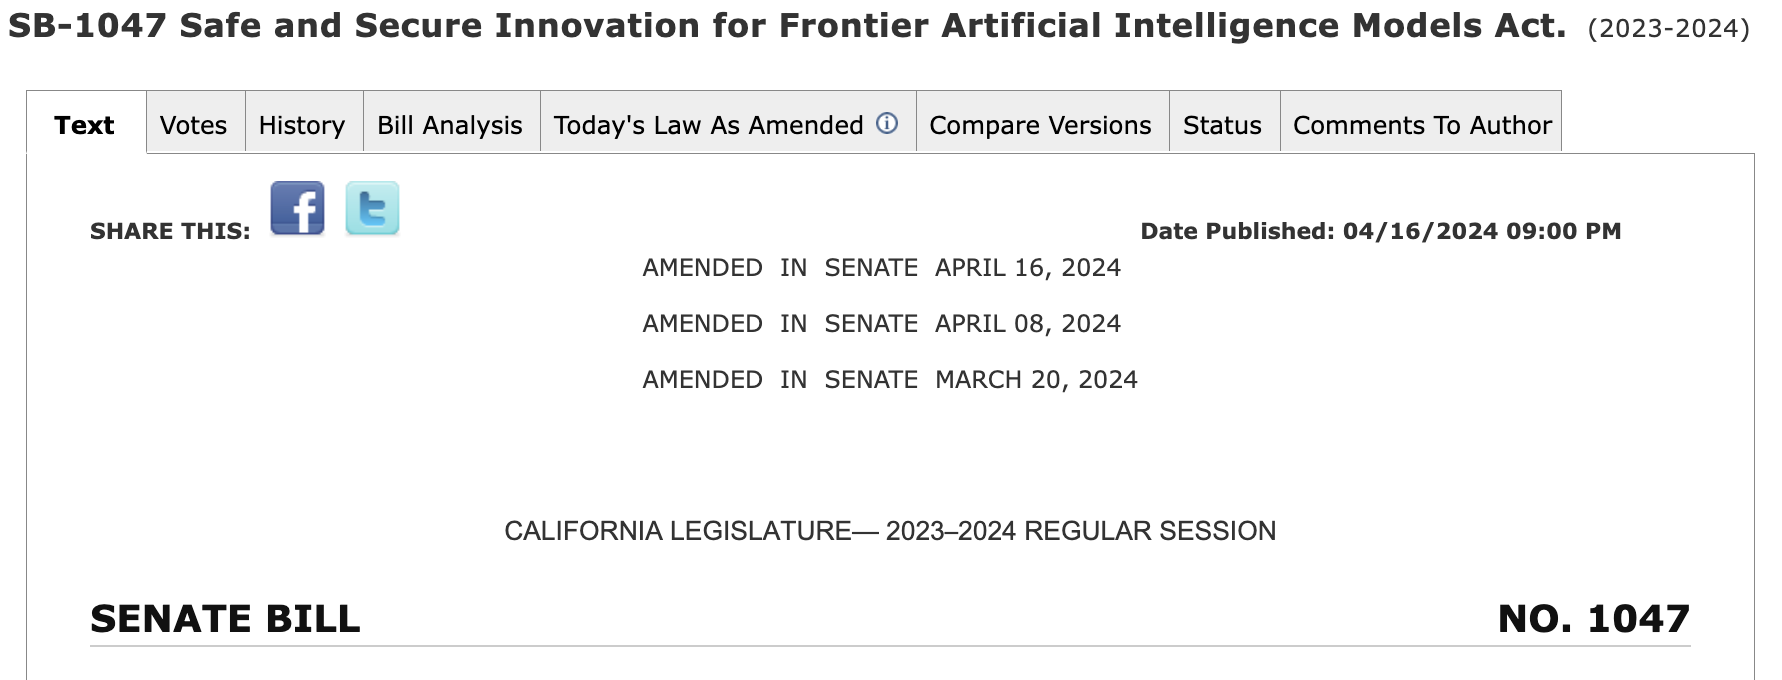 SB-1047 will stifle open-source AI and decrease safety